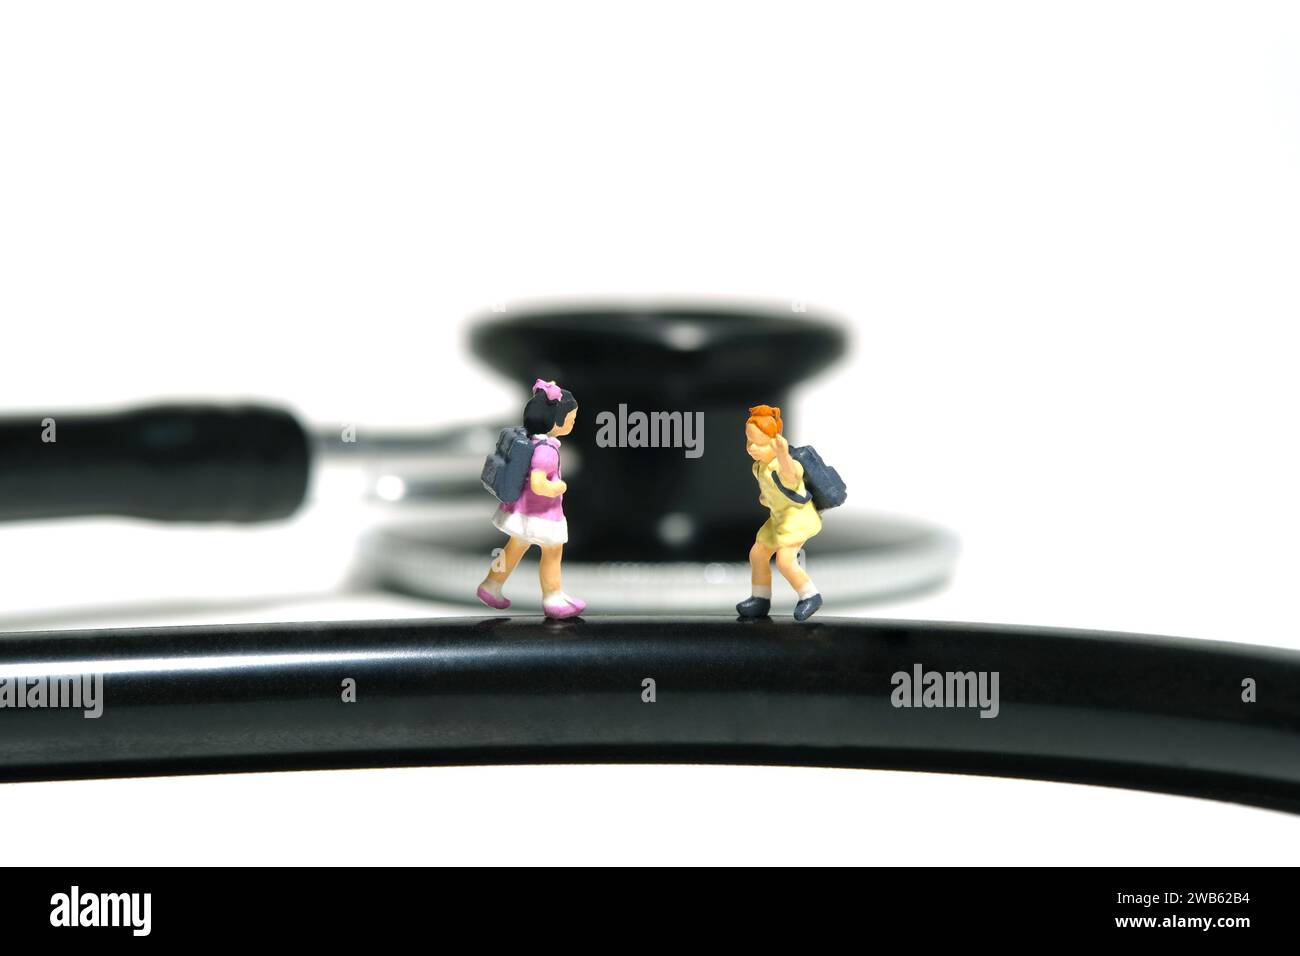 Miniature people toy figure photography. Two girl students standing above stethoscope, saying goodbye, sick leave. Isolated on white background. Image Stock Photo